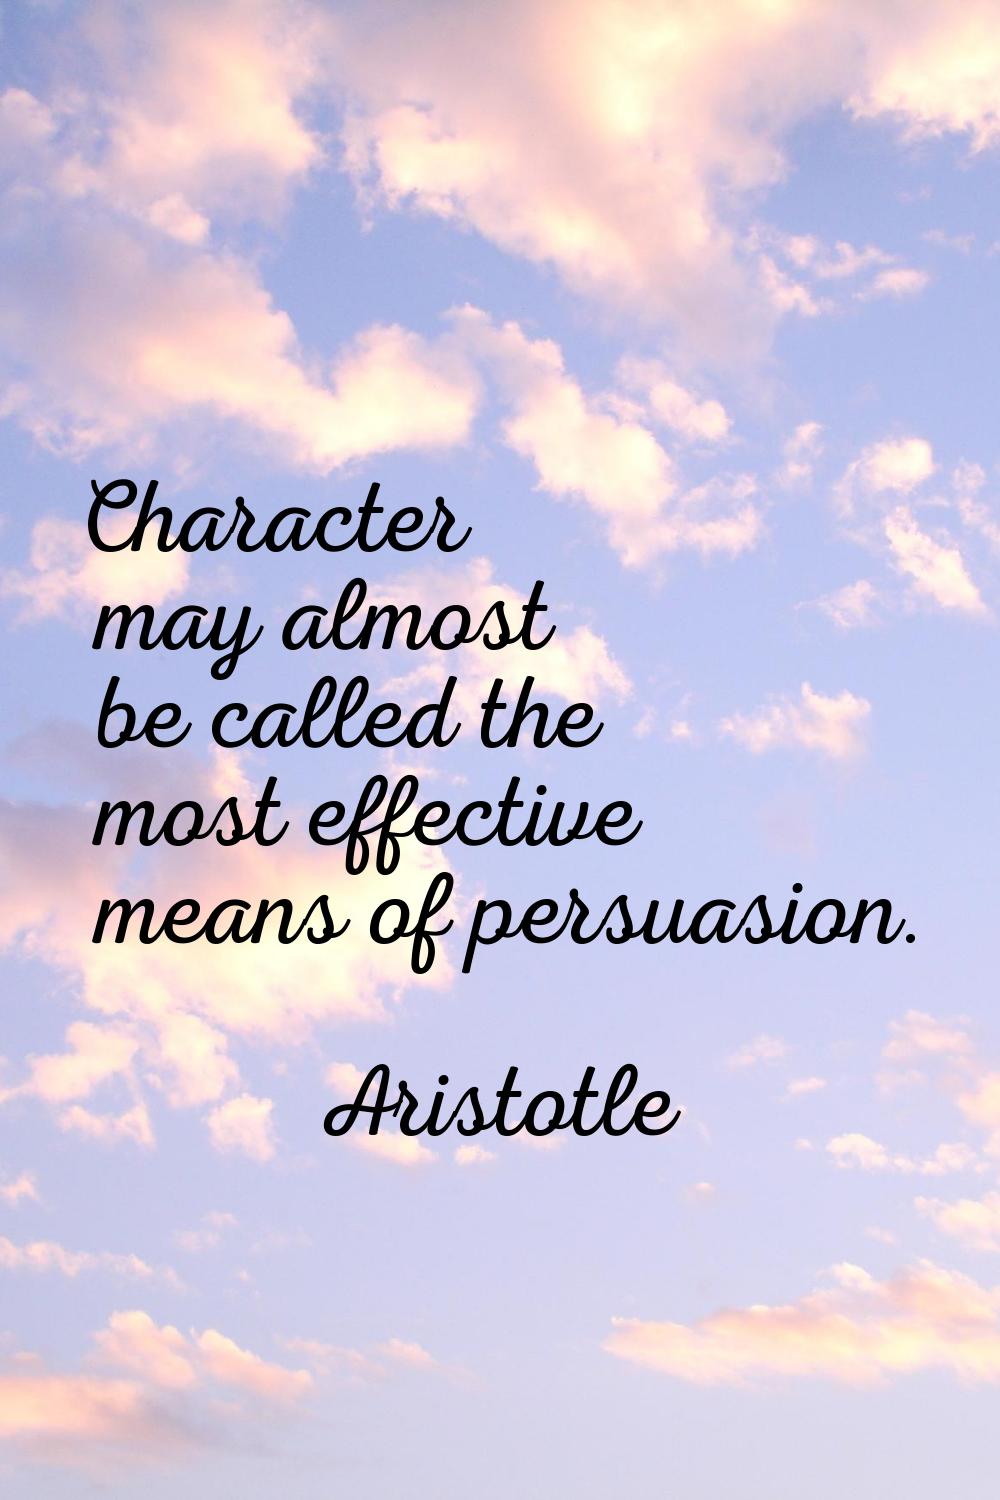 Character may almost be called the most effective means of persuasion.